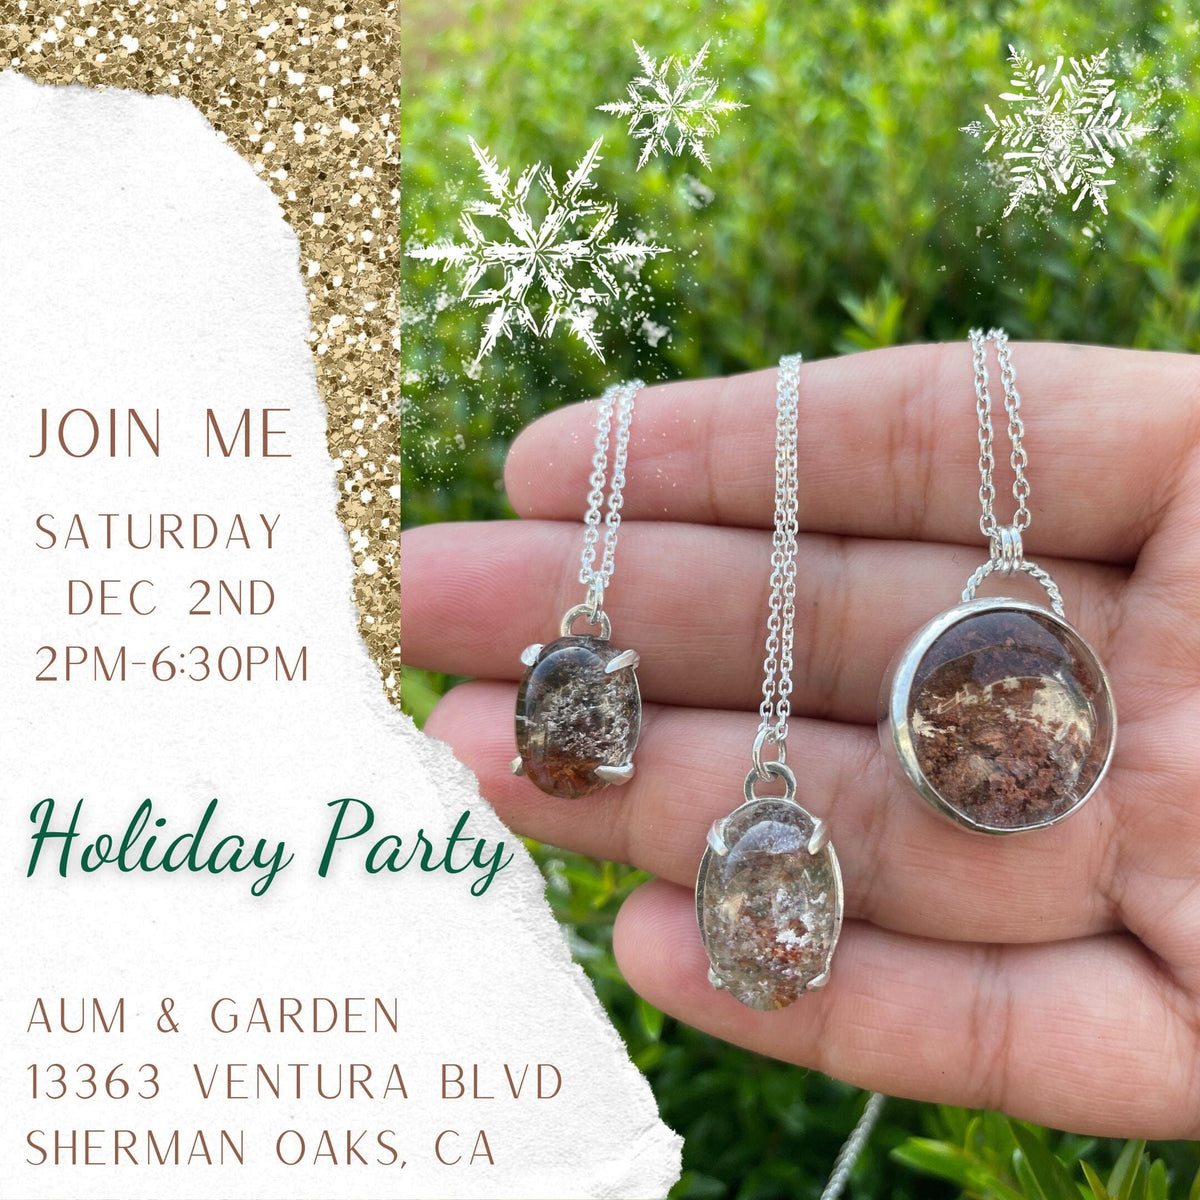 Aum and Garden's Holiday Party